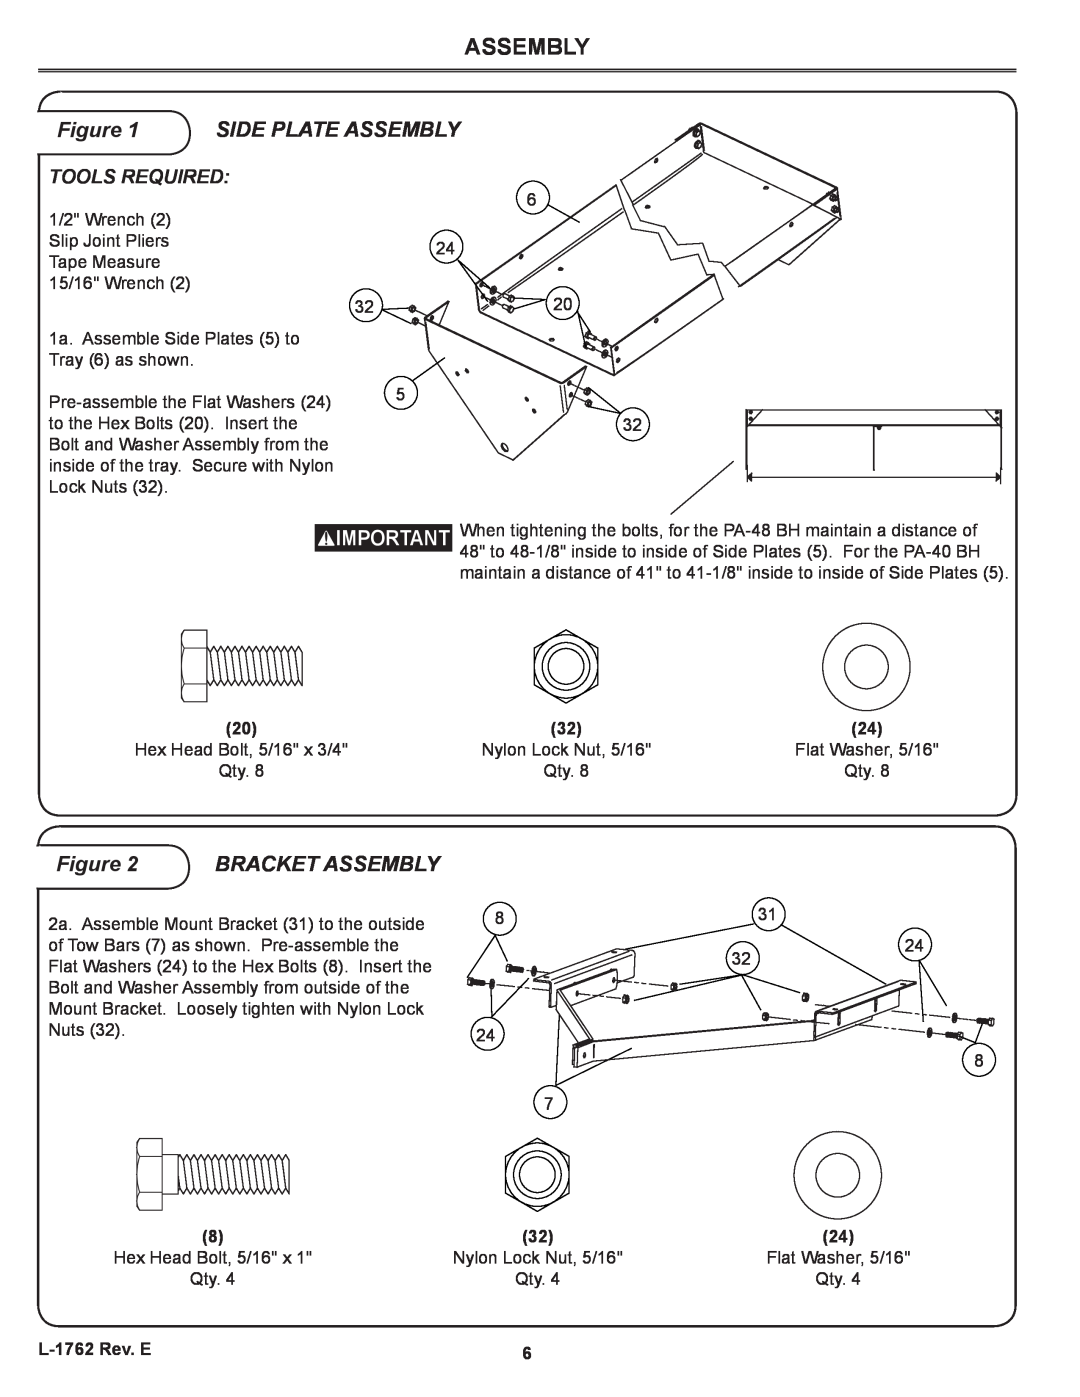 Brinly-Hardy PA-48 BH, PA-40 BH owner manual Side Plate Assembly, Bracket Assembly, Tools Required 